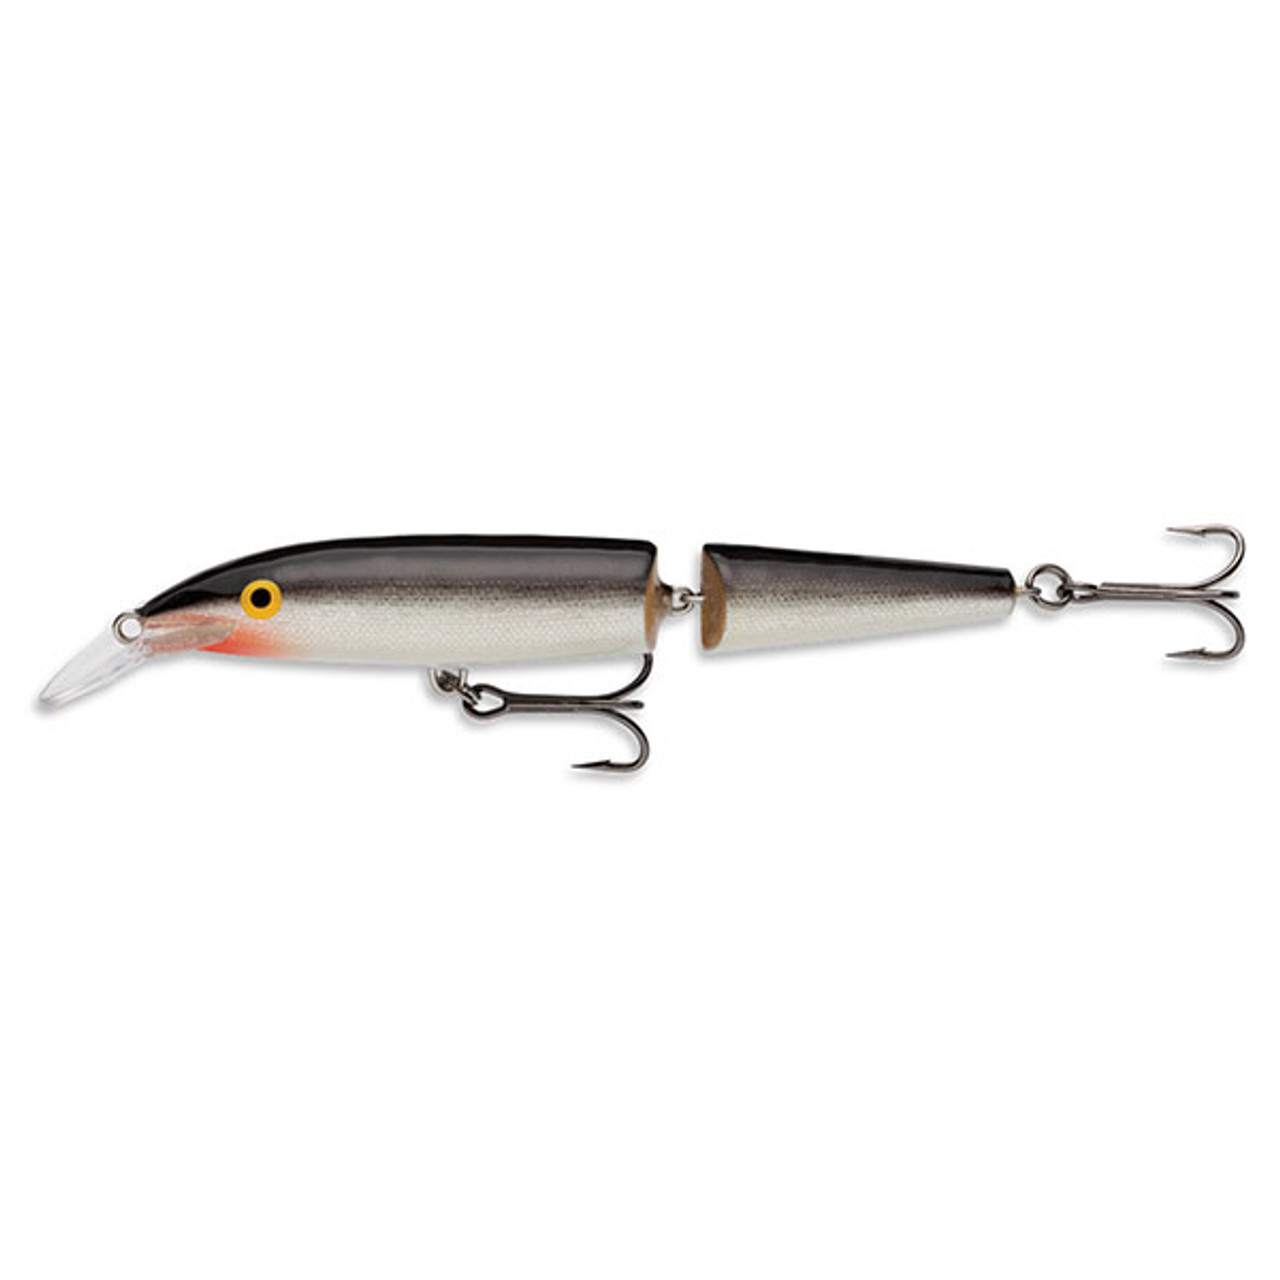 13cm Rapala X-Rap Jointed Shad Diving Crankbait Fishing Lure